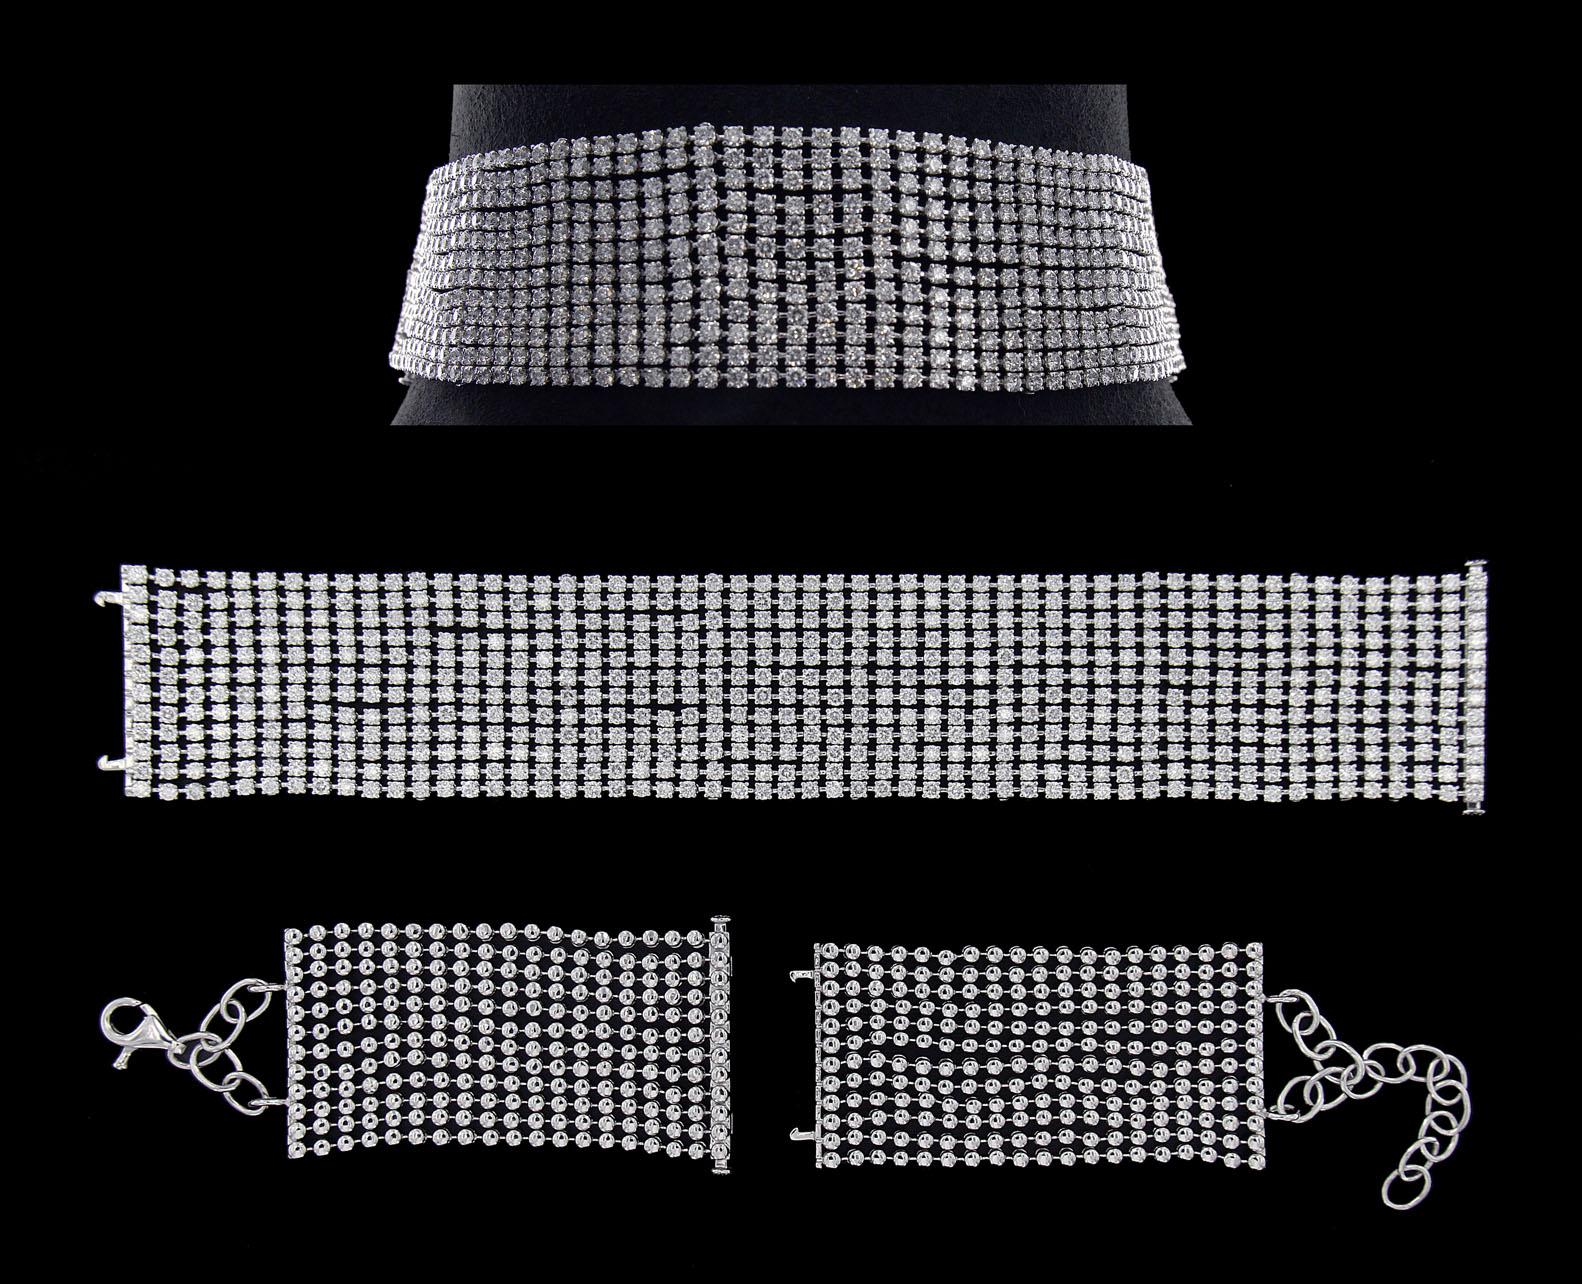 Trendy 18 Karat White Gold and Diamond Choker Necklace

Diamonds of approximately 25.710 carats, mounted on 18 karat white gold choker necklace. The Necklace weighs approximately 96.408 grams.

Please note: The charges specified do not include any